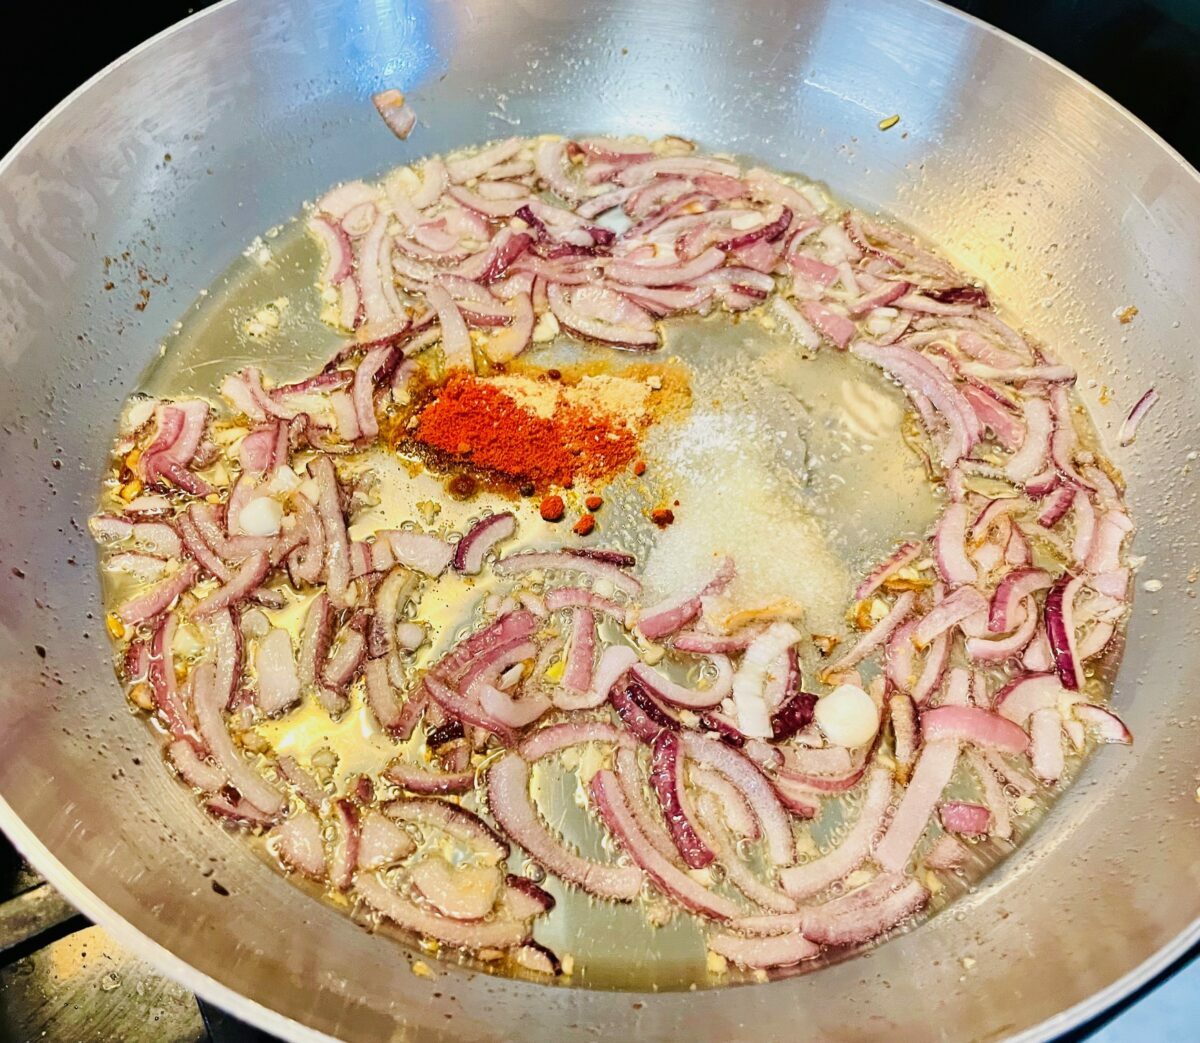 Sliced red onion with spices cooking in oil in a stainless steel pan.